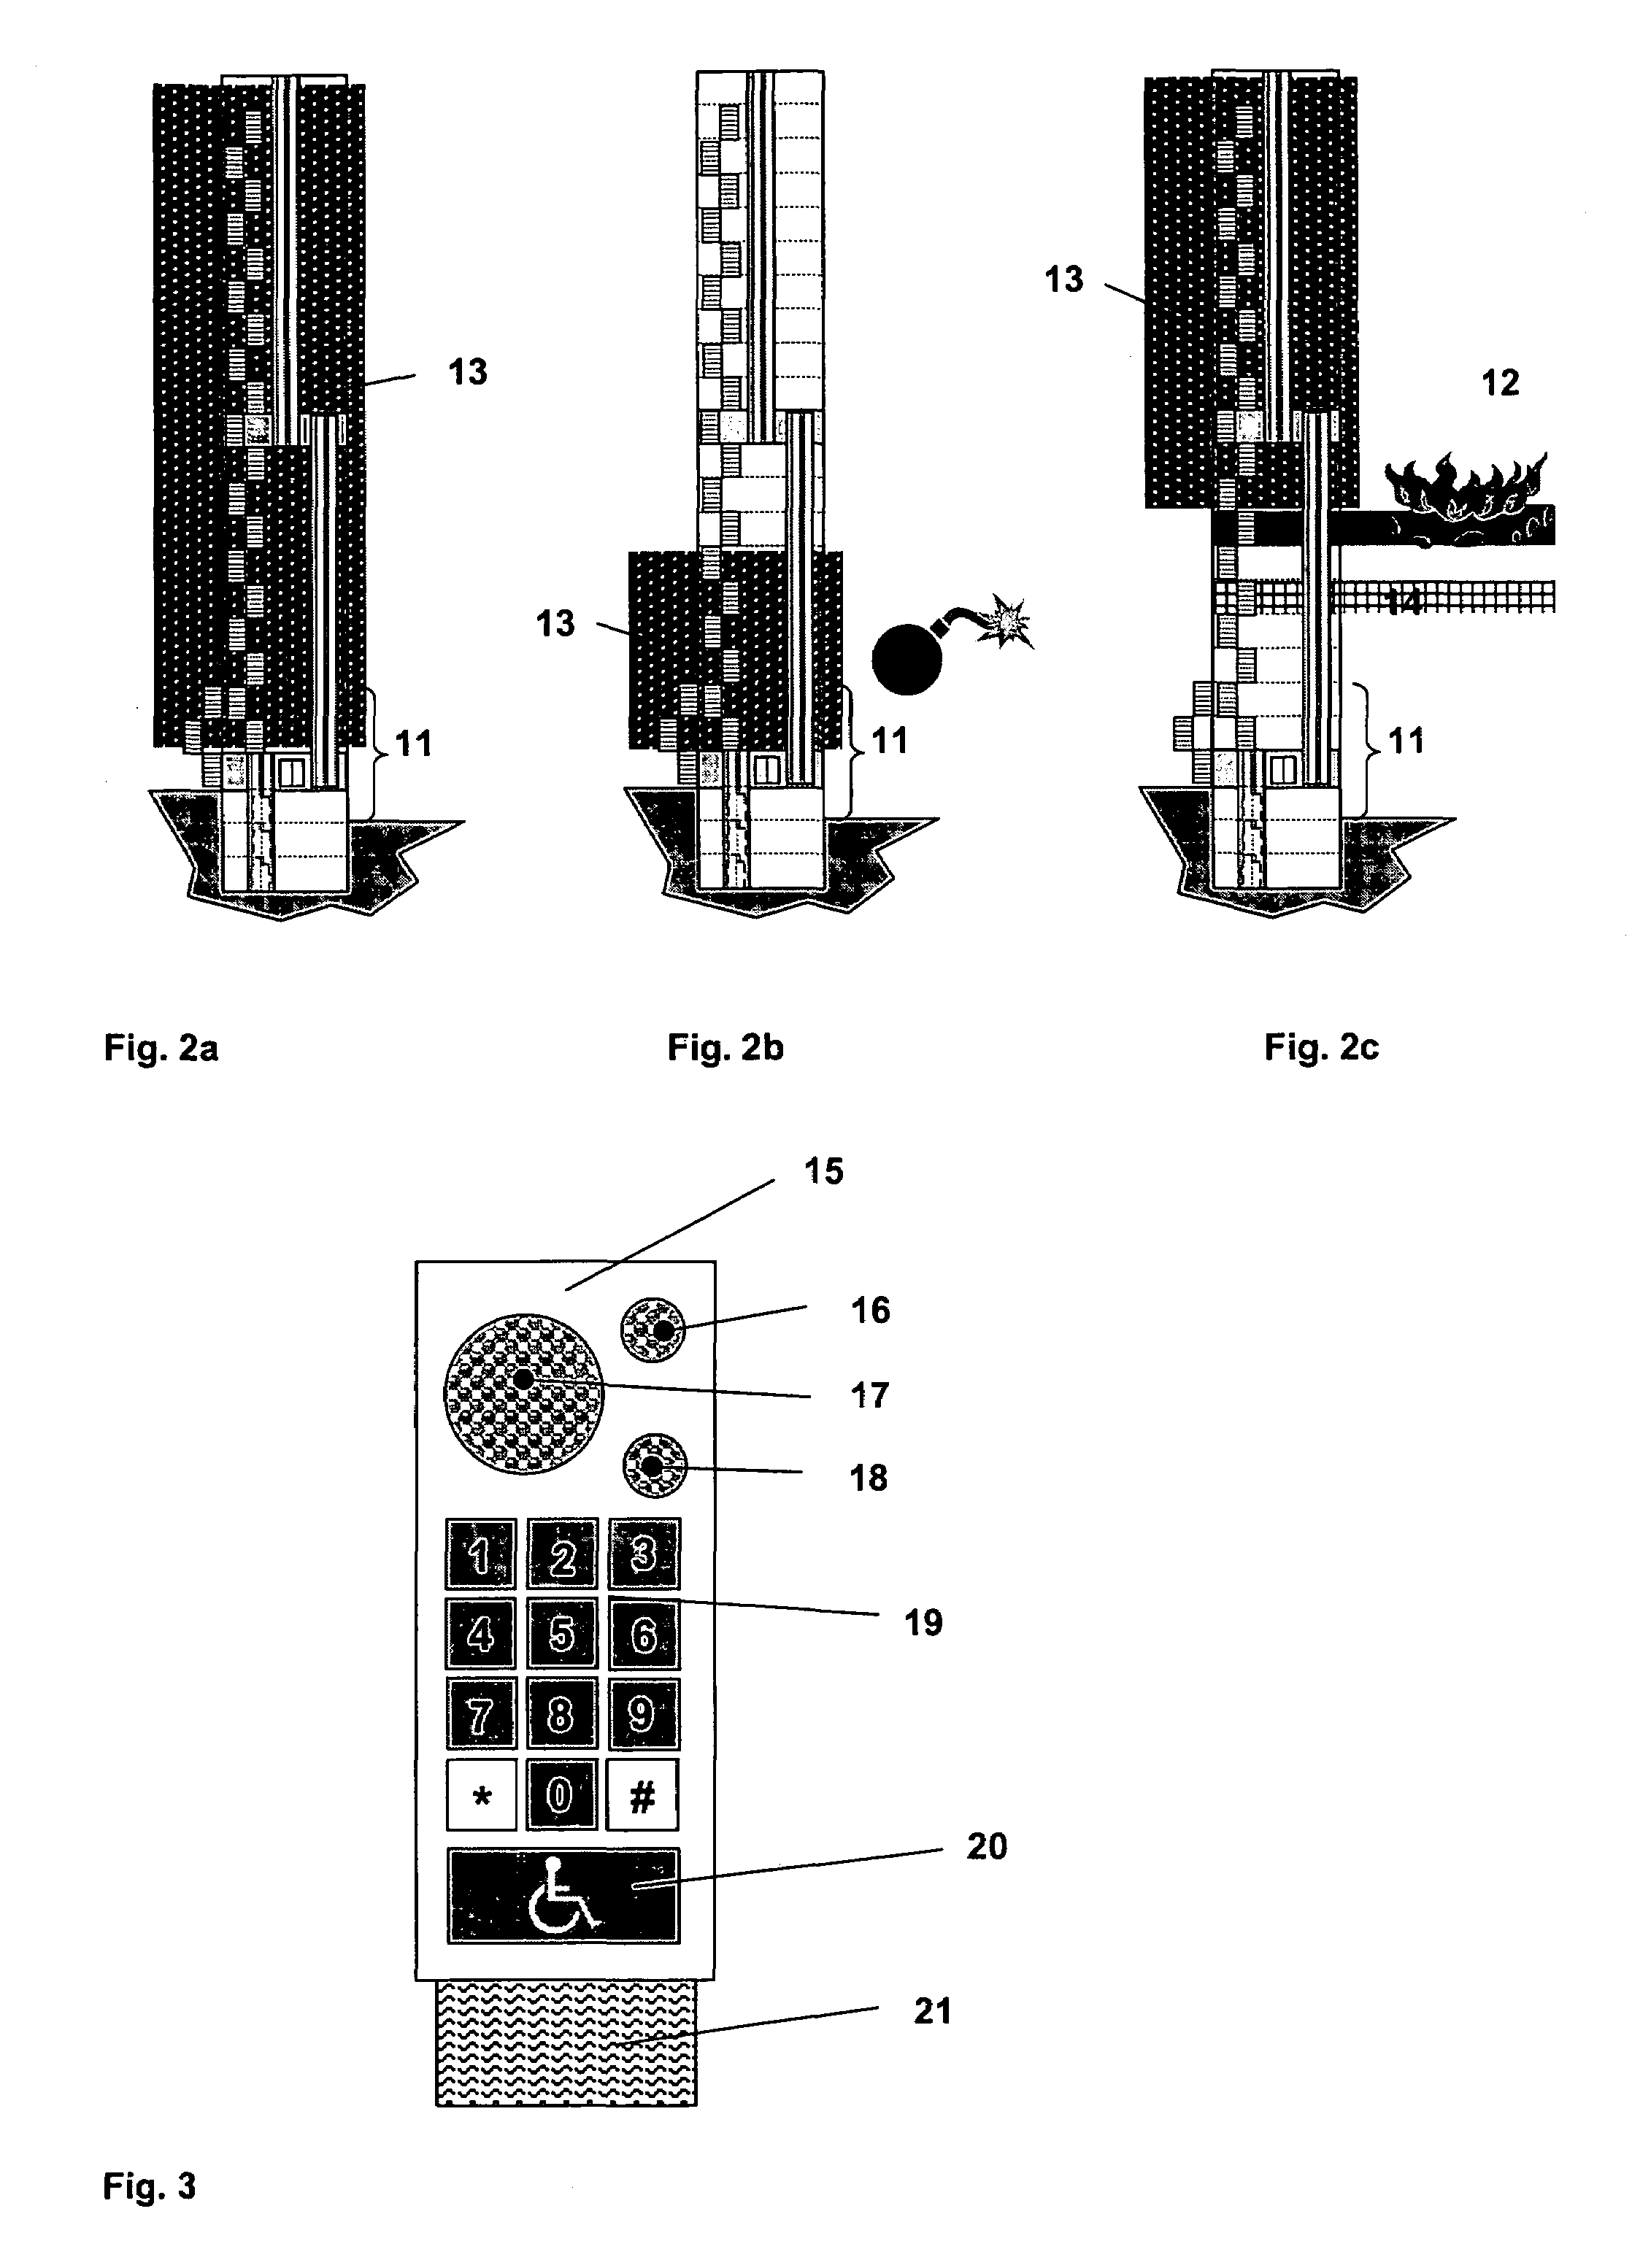 Method and system for emergency evacuation of building occupants and a method for modernization of an existing building with said system